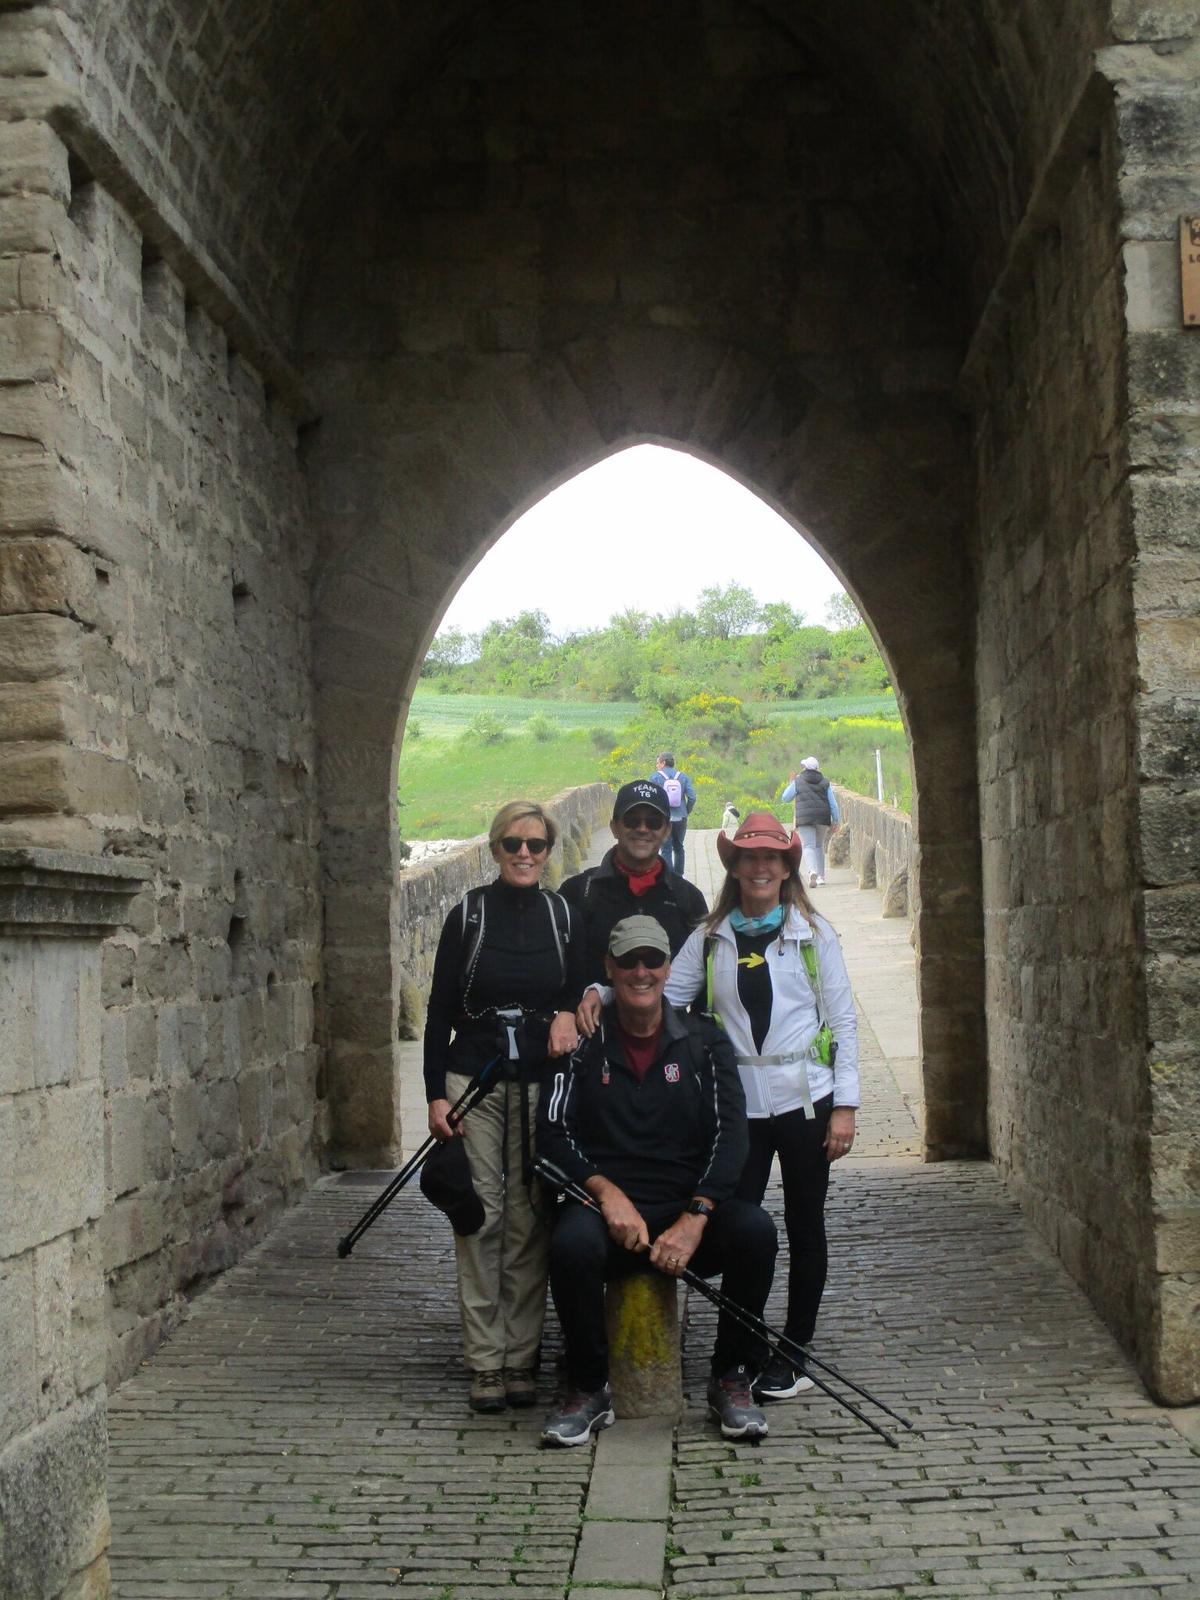 A group traveling with Fresco Tours. (Courtesy of Alex Chang)